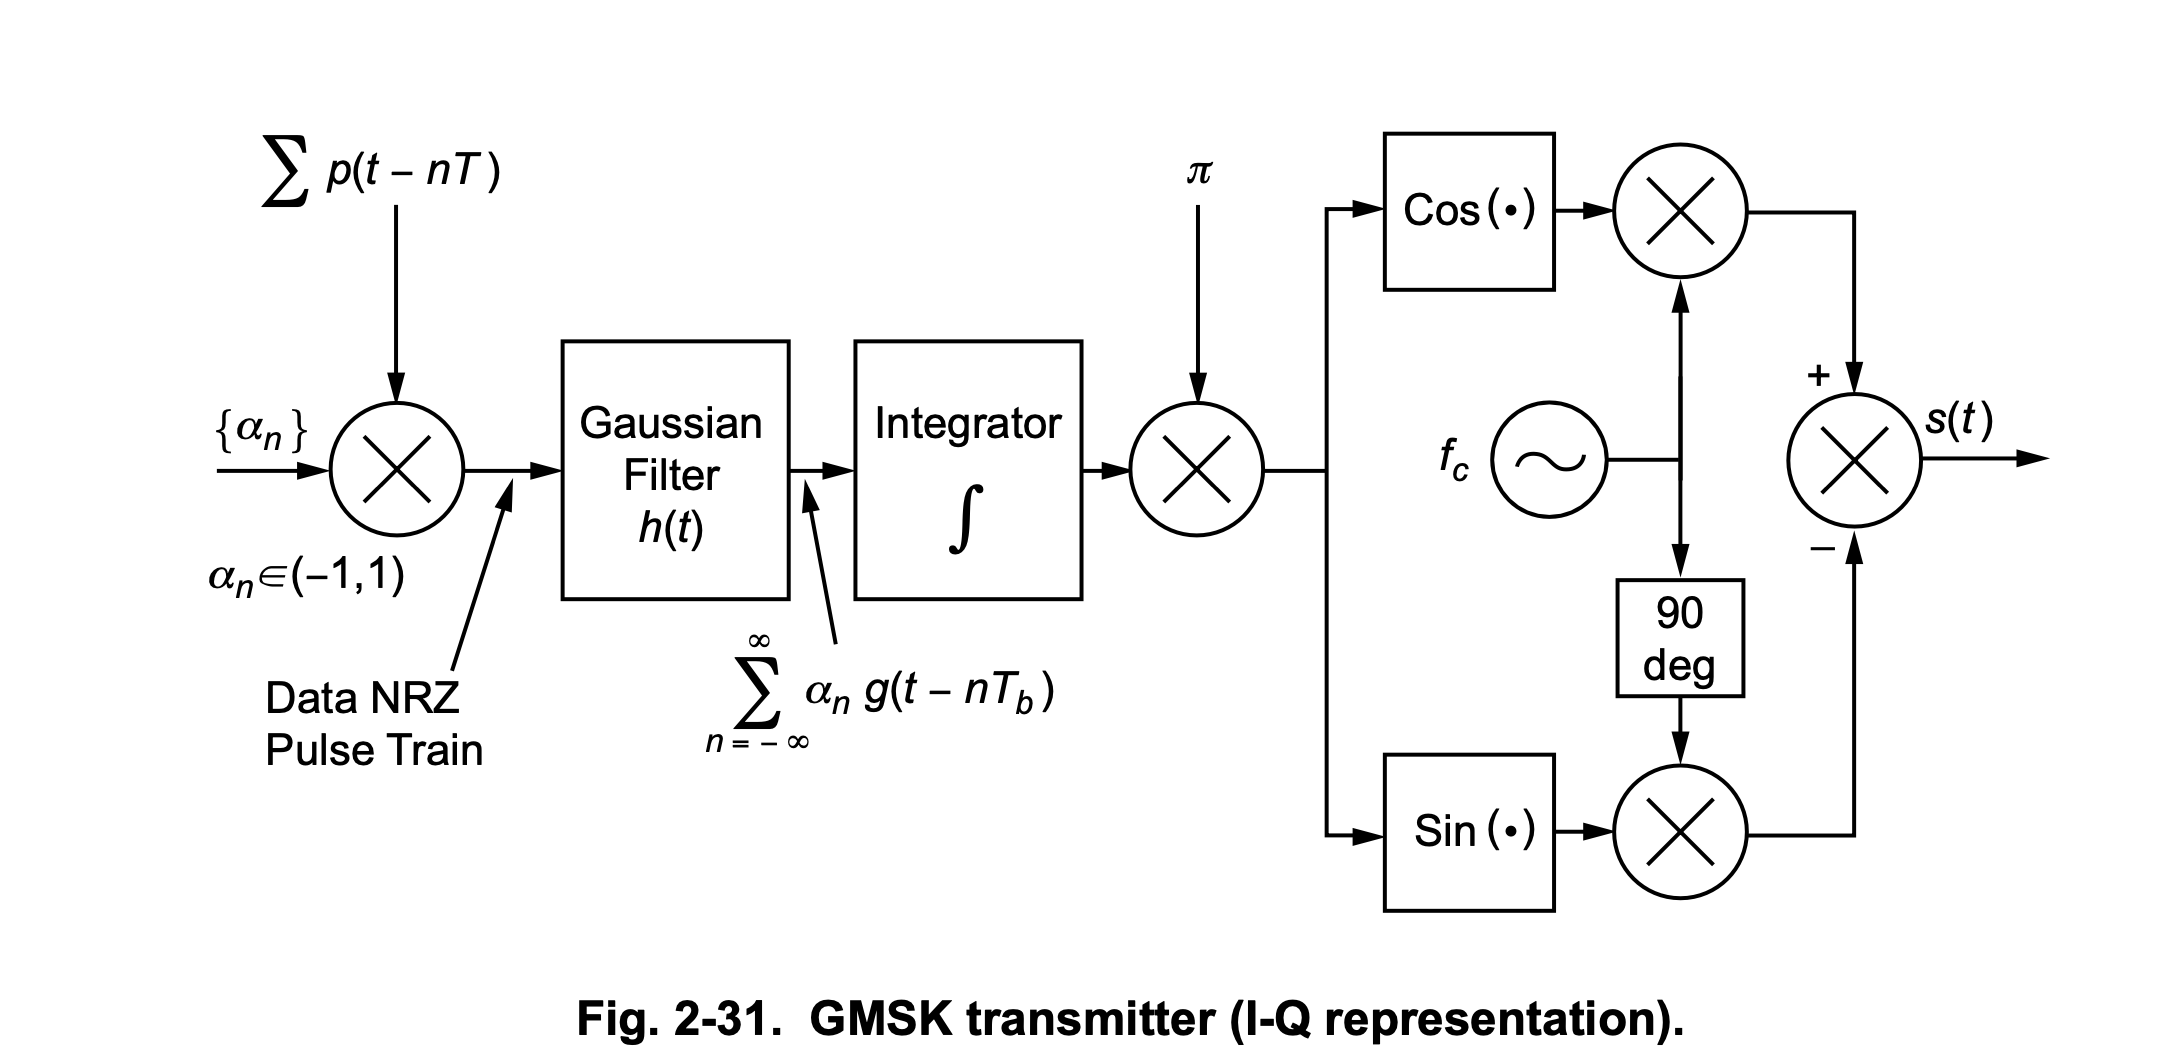 How GMSK gets made. Source: Page 65, Chapter 2, Volume 3, JPL DESCANSO Book Series